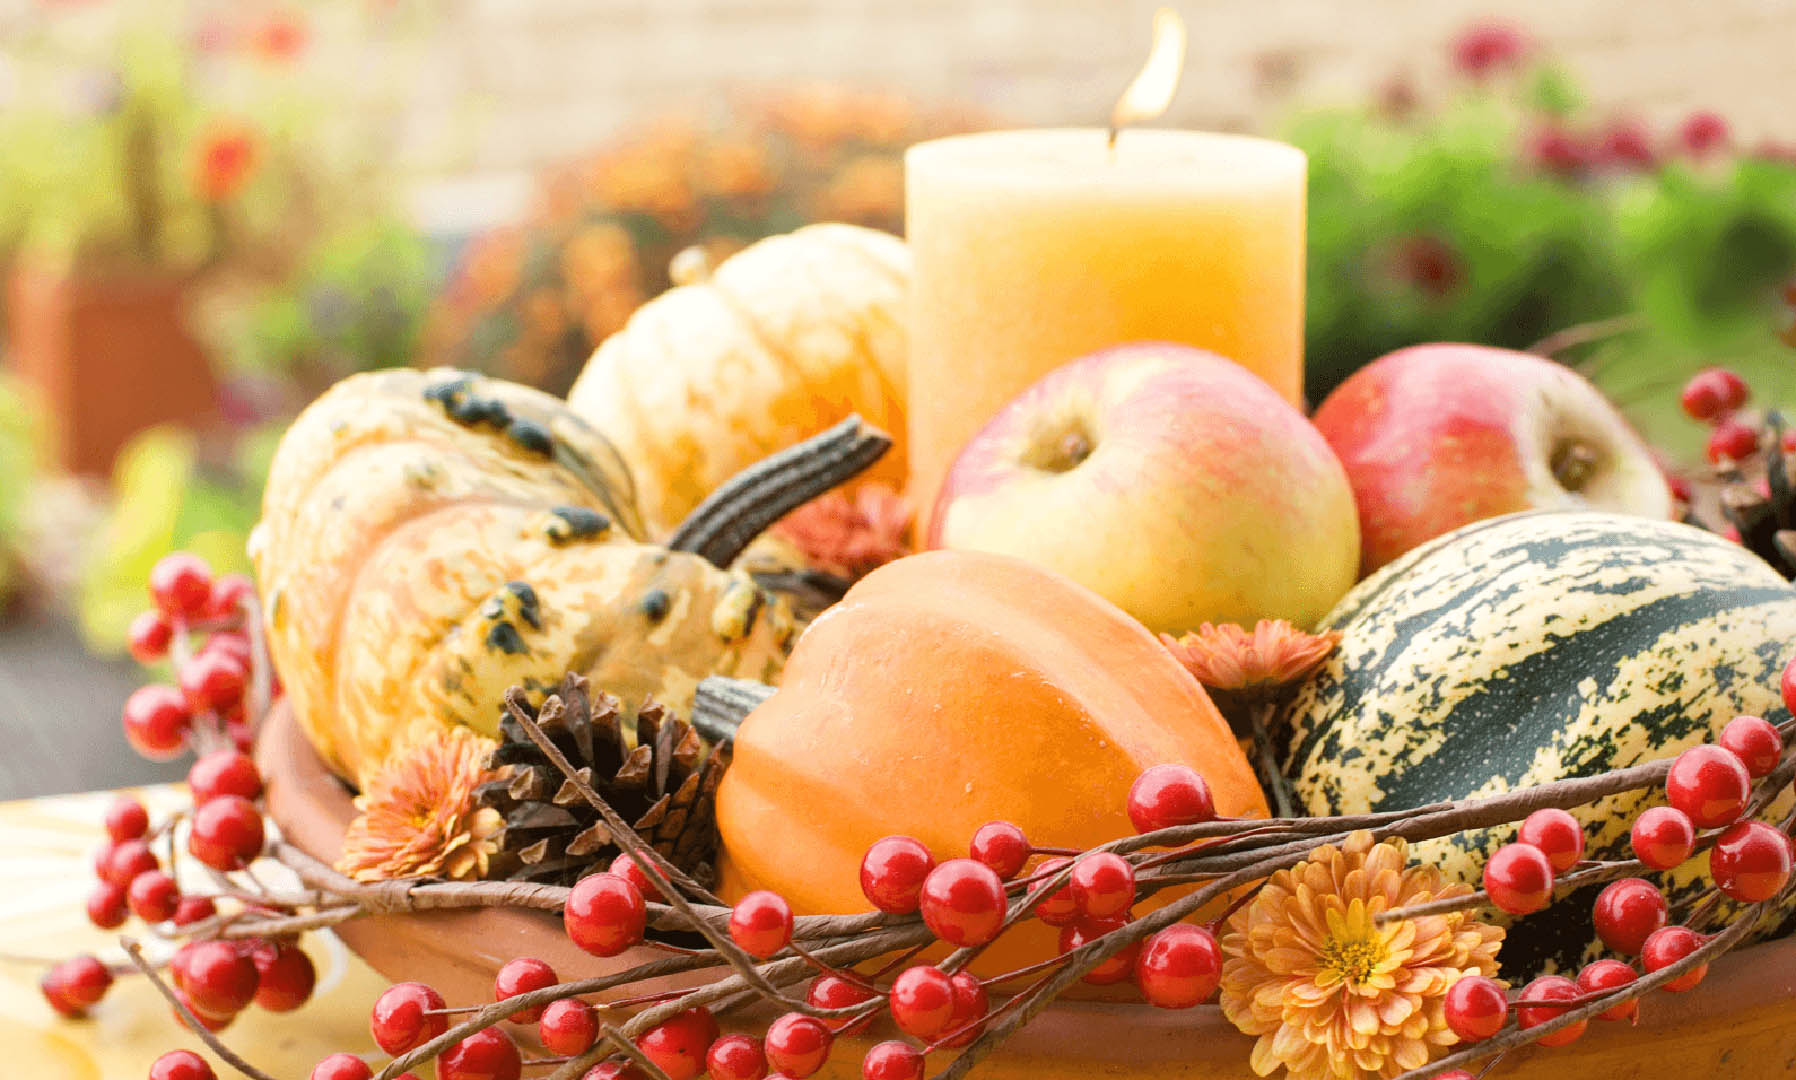 Ideas for Beautiful Fall Decor from Broadview Pumpkins Image